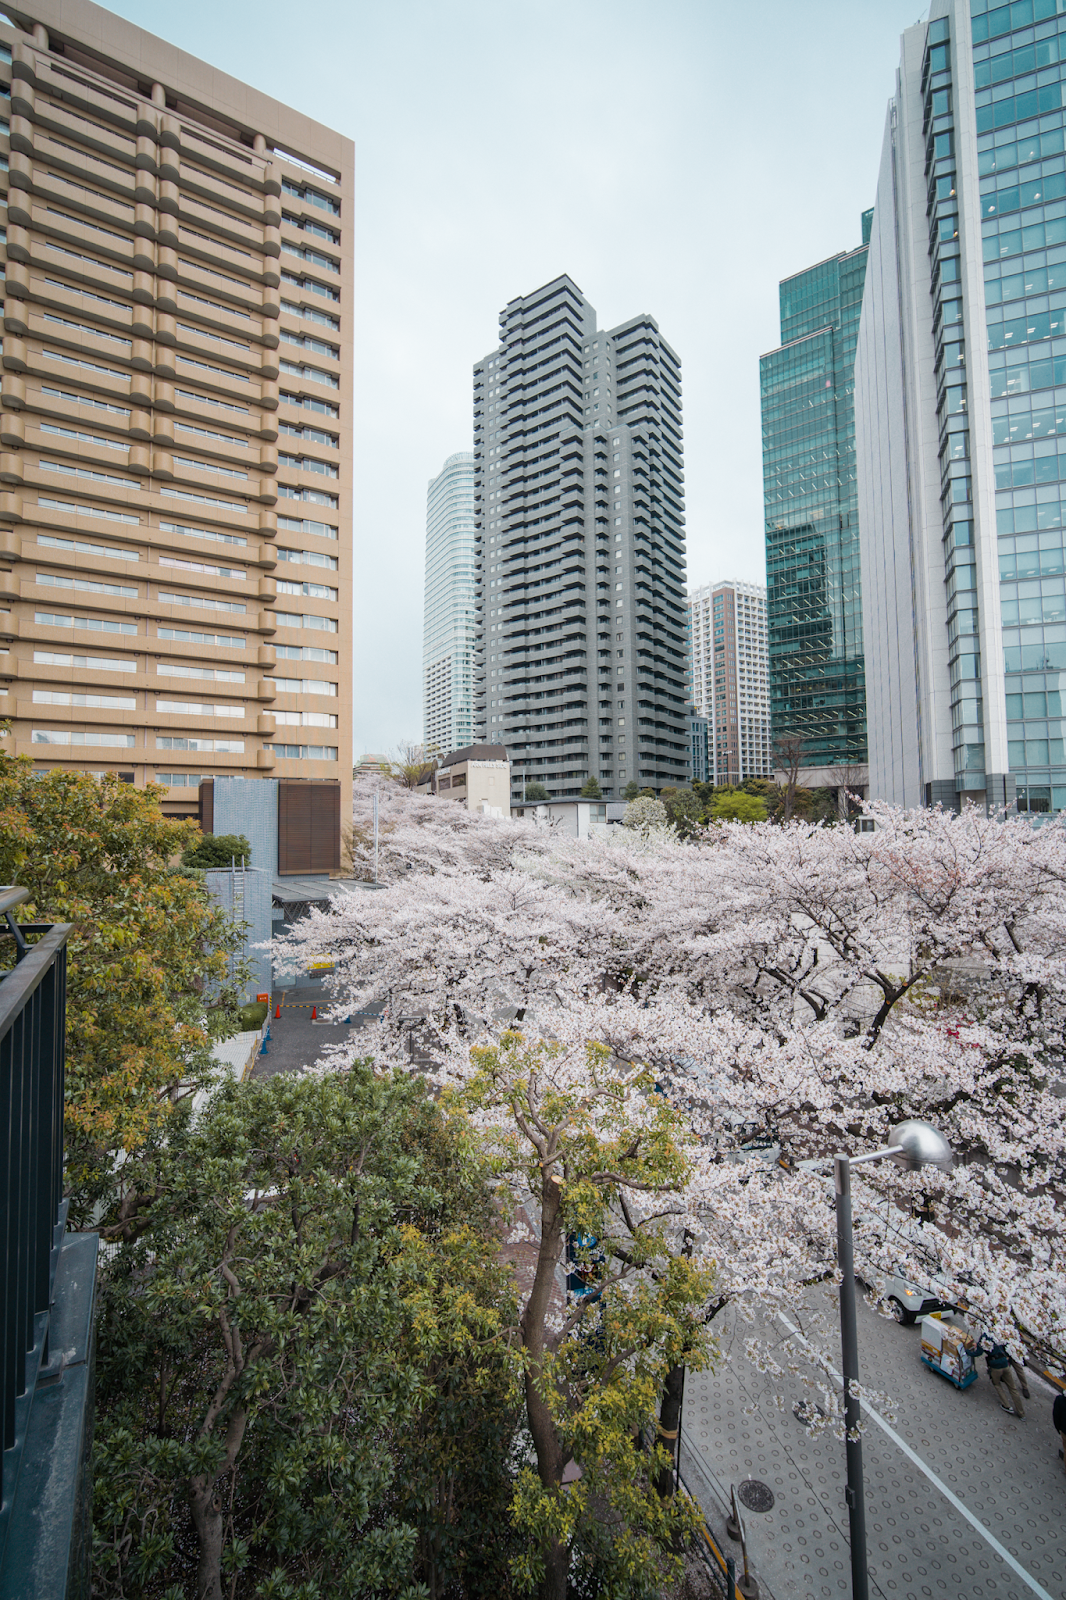 Cherry blossom spot in Roppongi, Tokyo's Not So Secret Cherry Blossoms Spots That You Might Not Know Of - Style and Travel Blogger Van Le (FOREVERVANNY.com)